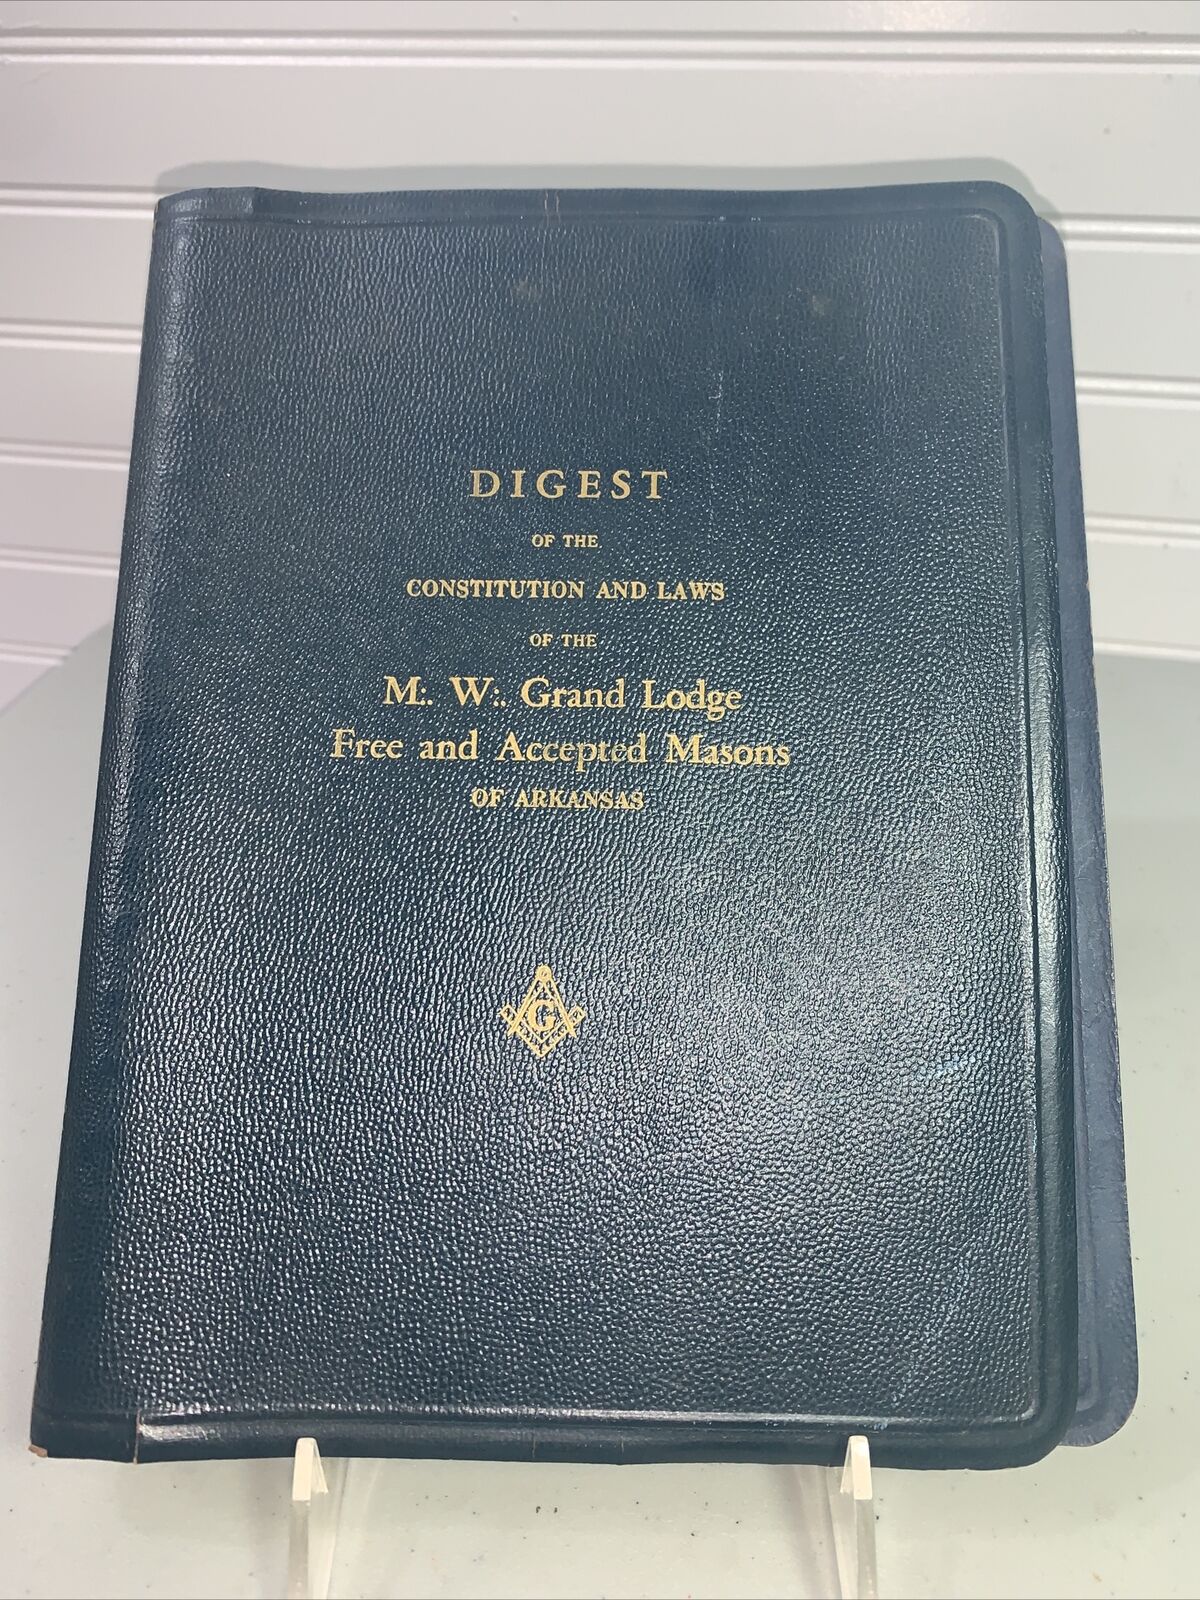 1957 FREEMASONS DIGEST CONSTITUTION & LAWS OF THE M.W. GRAND LODGE OF AR.(7D)